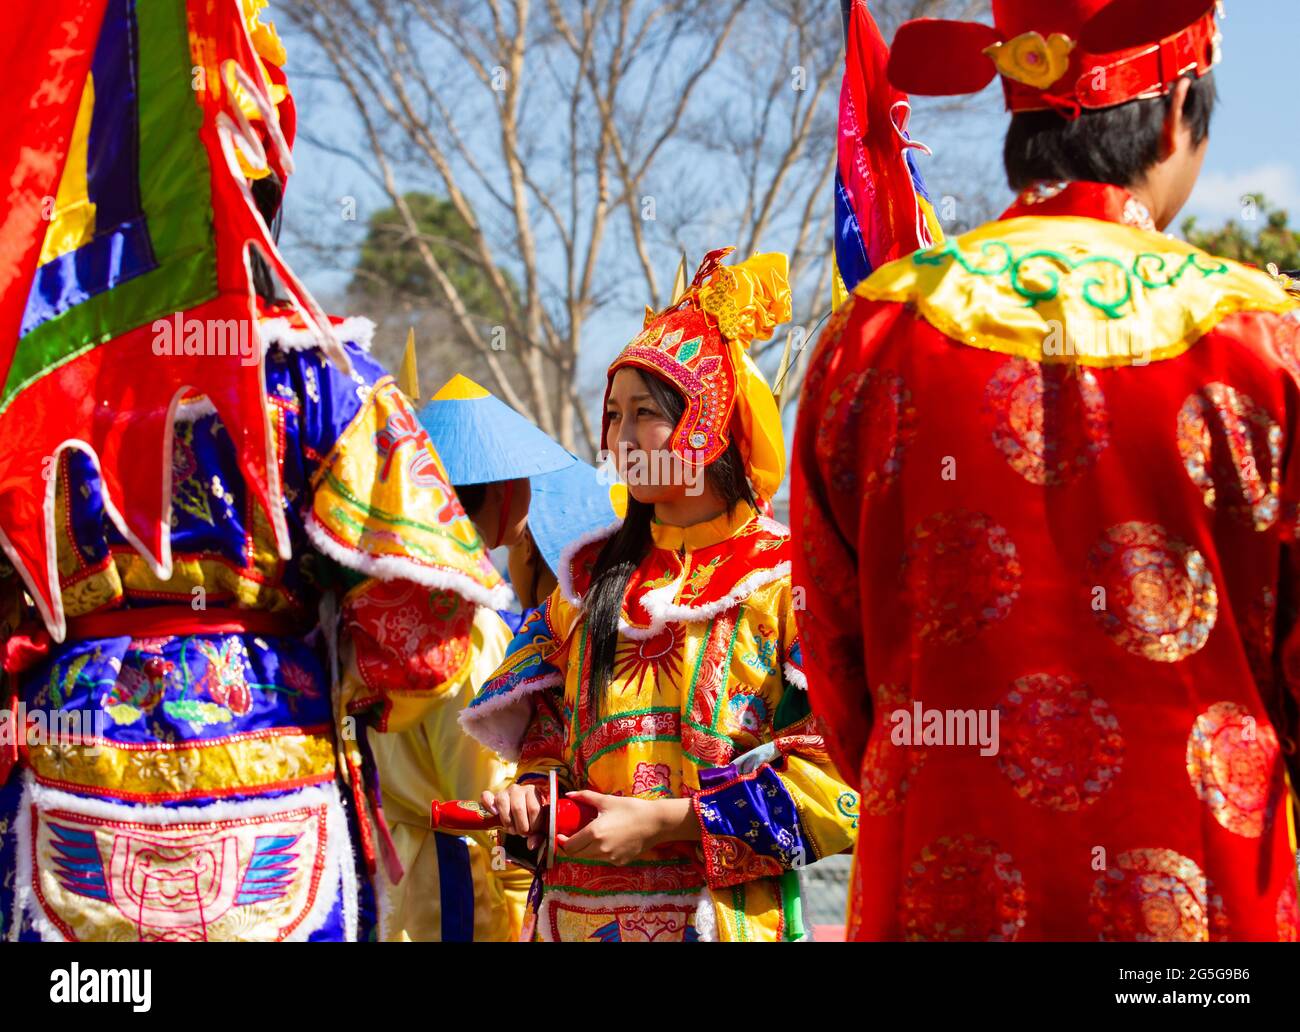 Role players dressed as royal subjects of Emperor Quang Trung during Tet festival Stock Photo